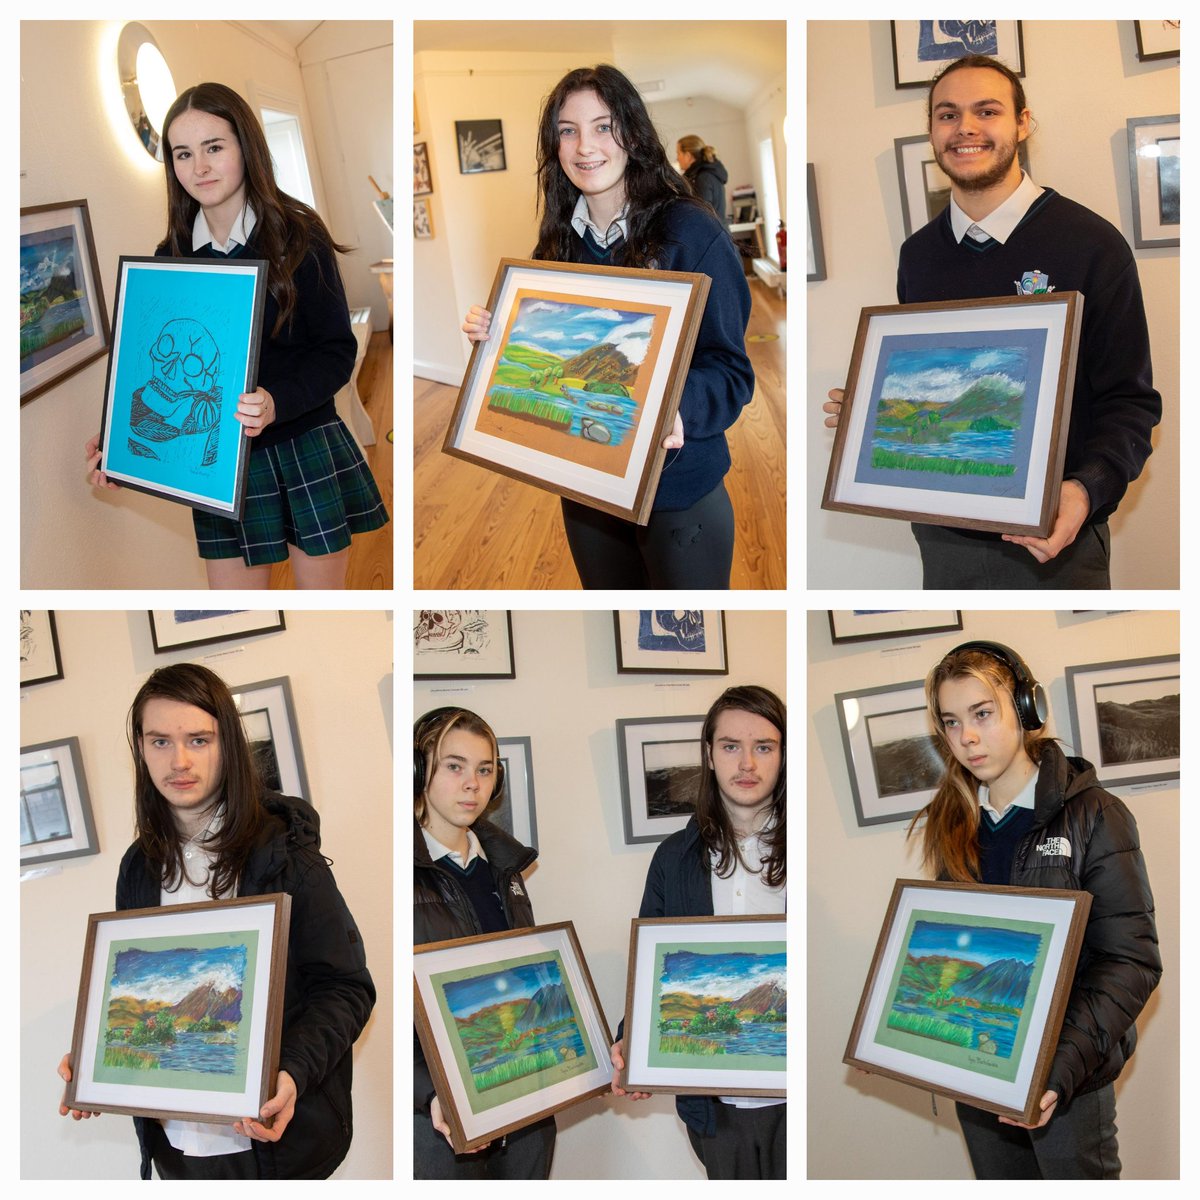 Our wonderful exhibition of our students Art work in Tramore coastguard Station gallery which has been running for the month of January has come to an end. Well done everyone to everyone involved and to all @TramoreCgcc1